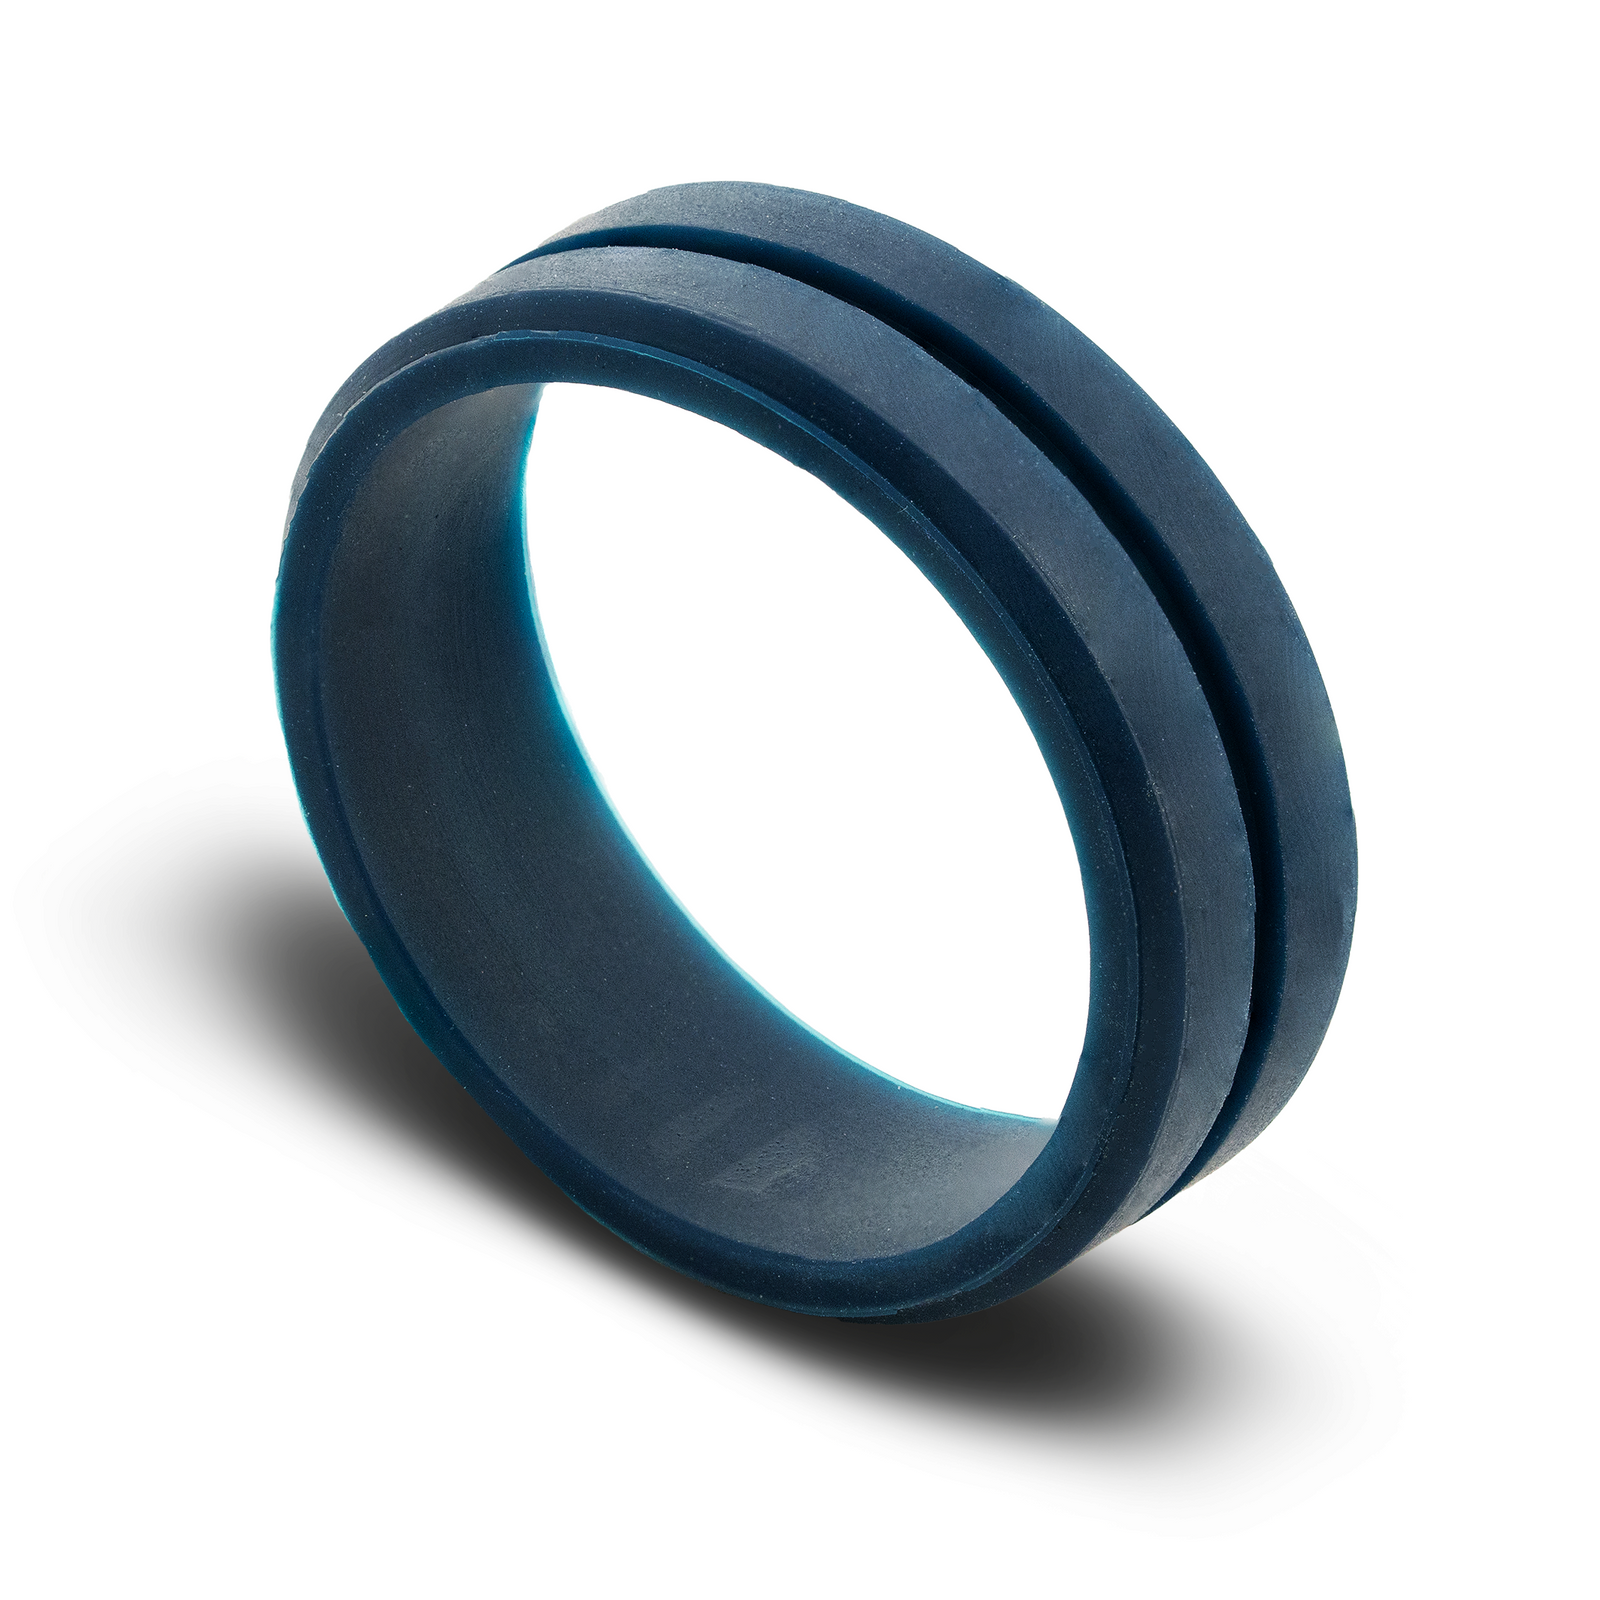 The “Deep Blue” Silicone Ring